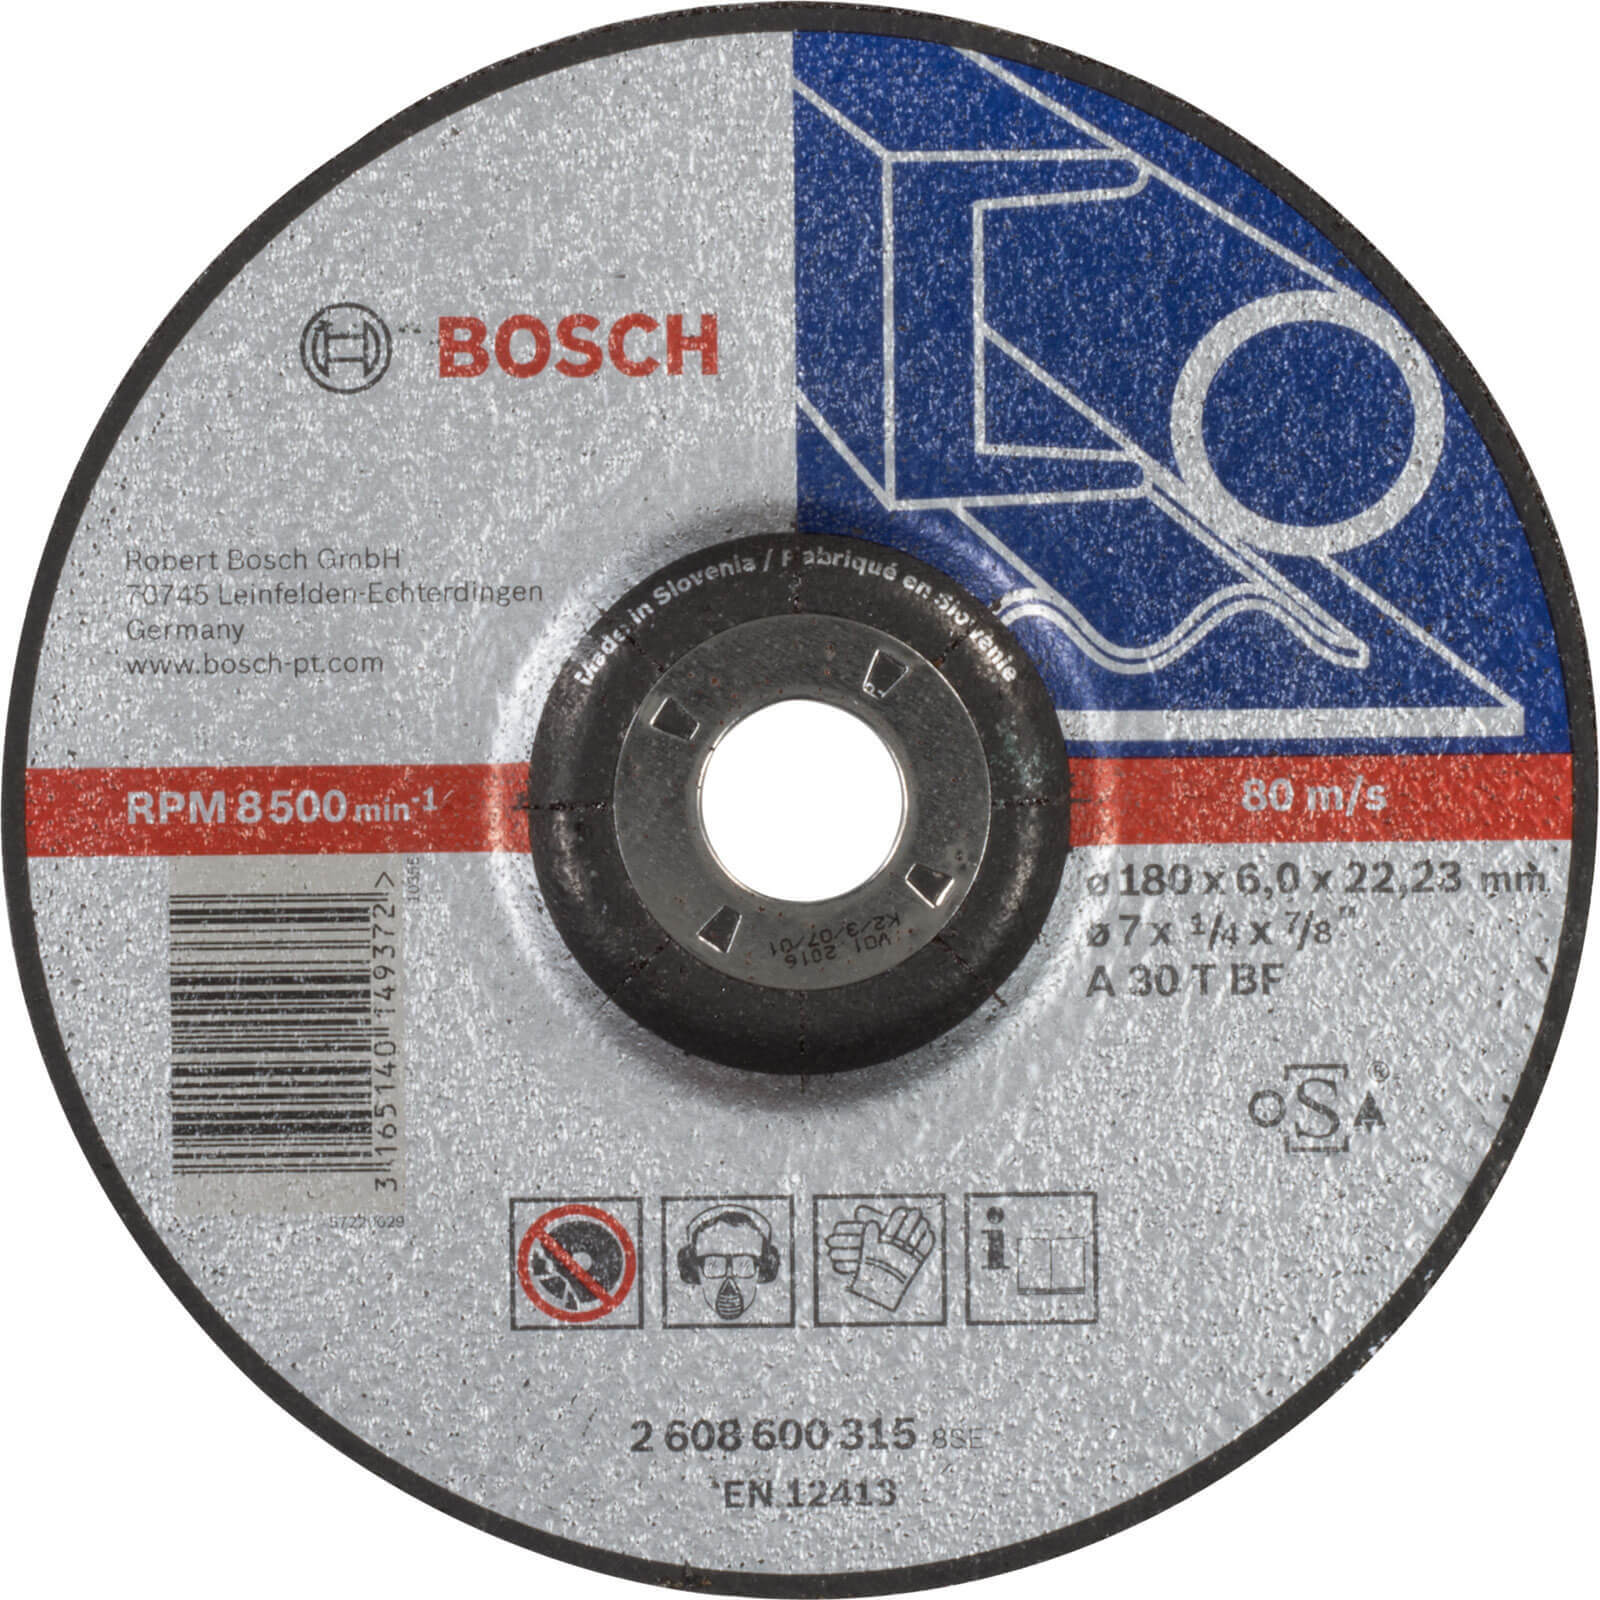 Photo of Bosch A30t Bf Drepressed Centre Metal Grinding Disc 180mm